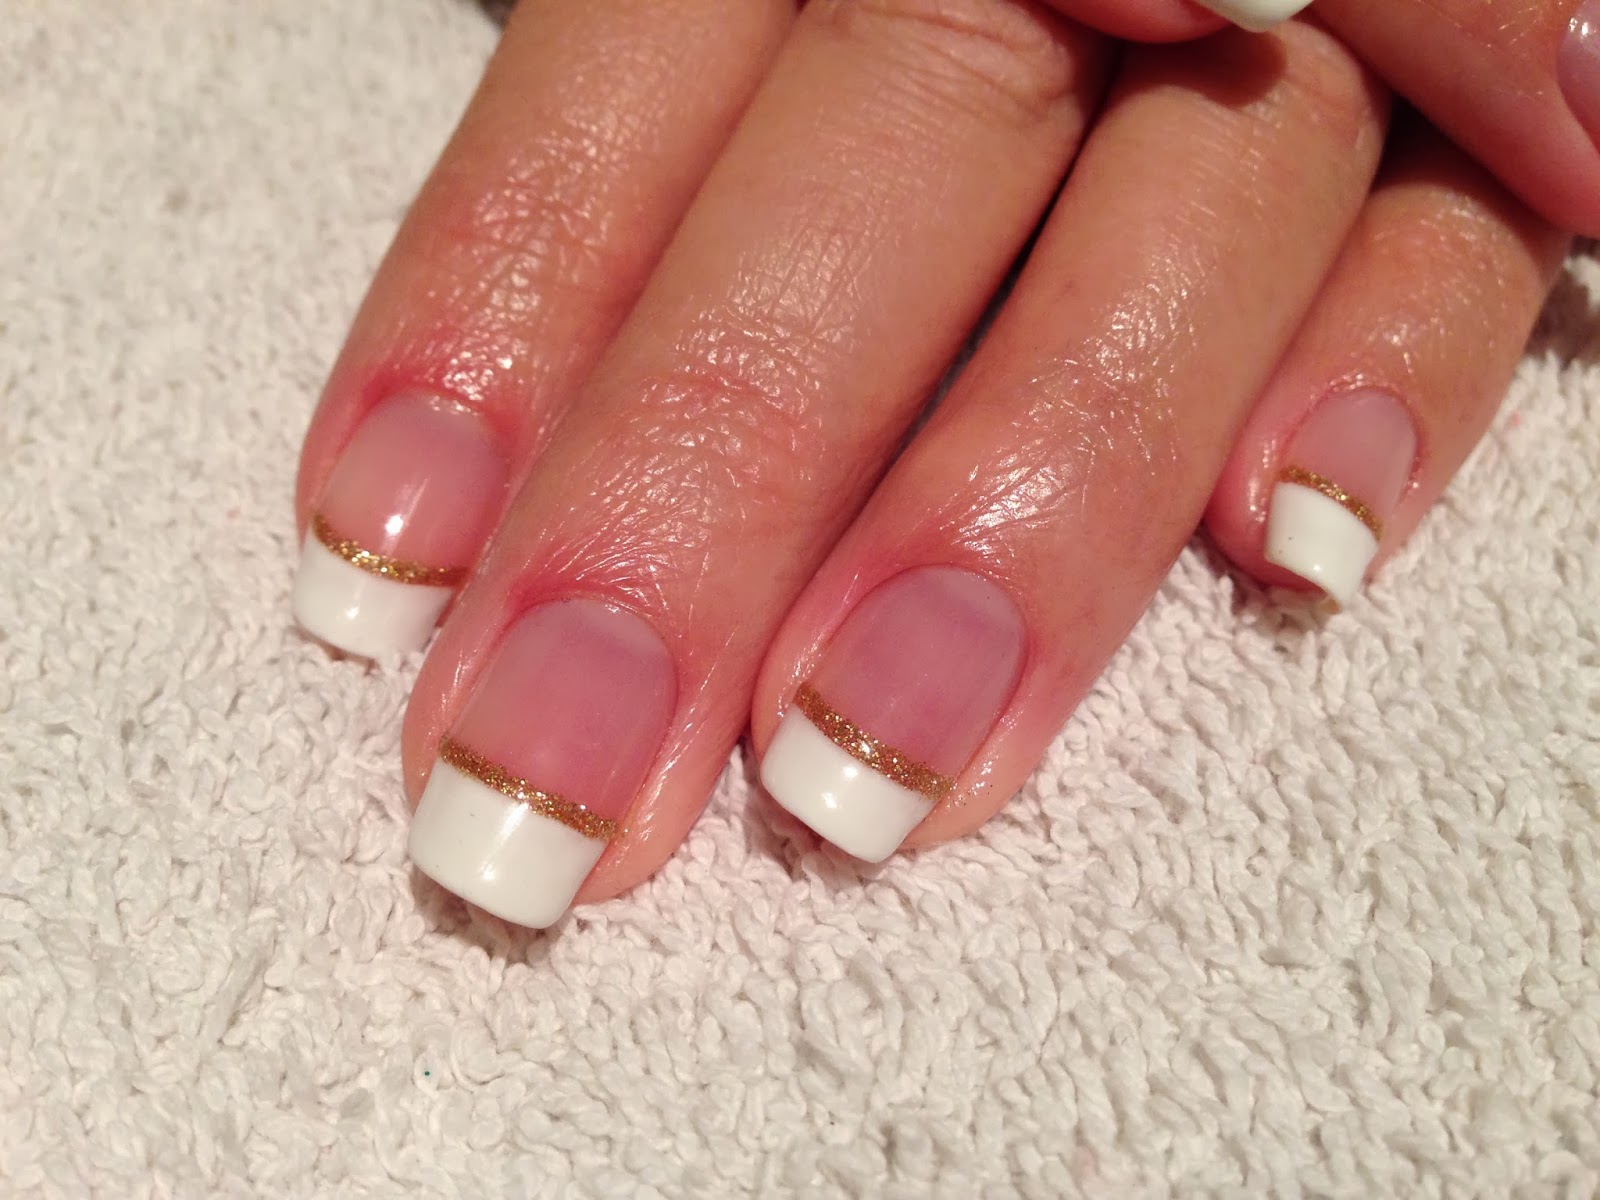 5. "Red and Gold French Manicure for the Holidays" - wide 1